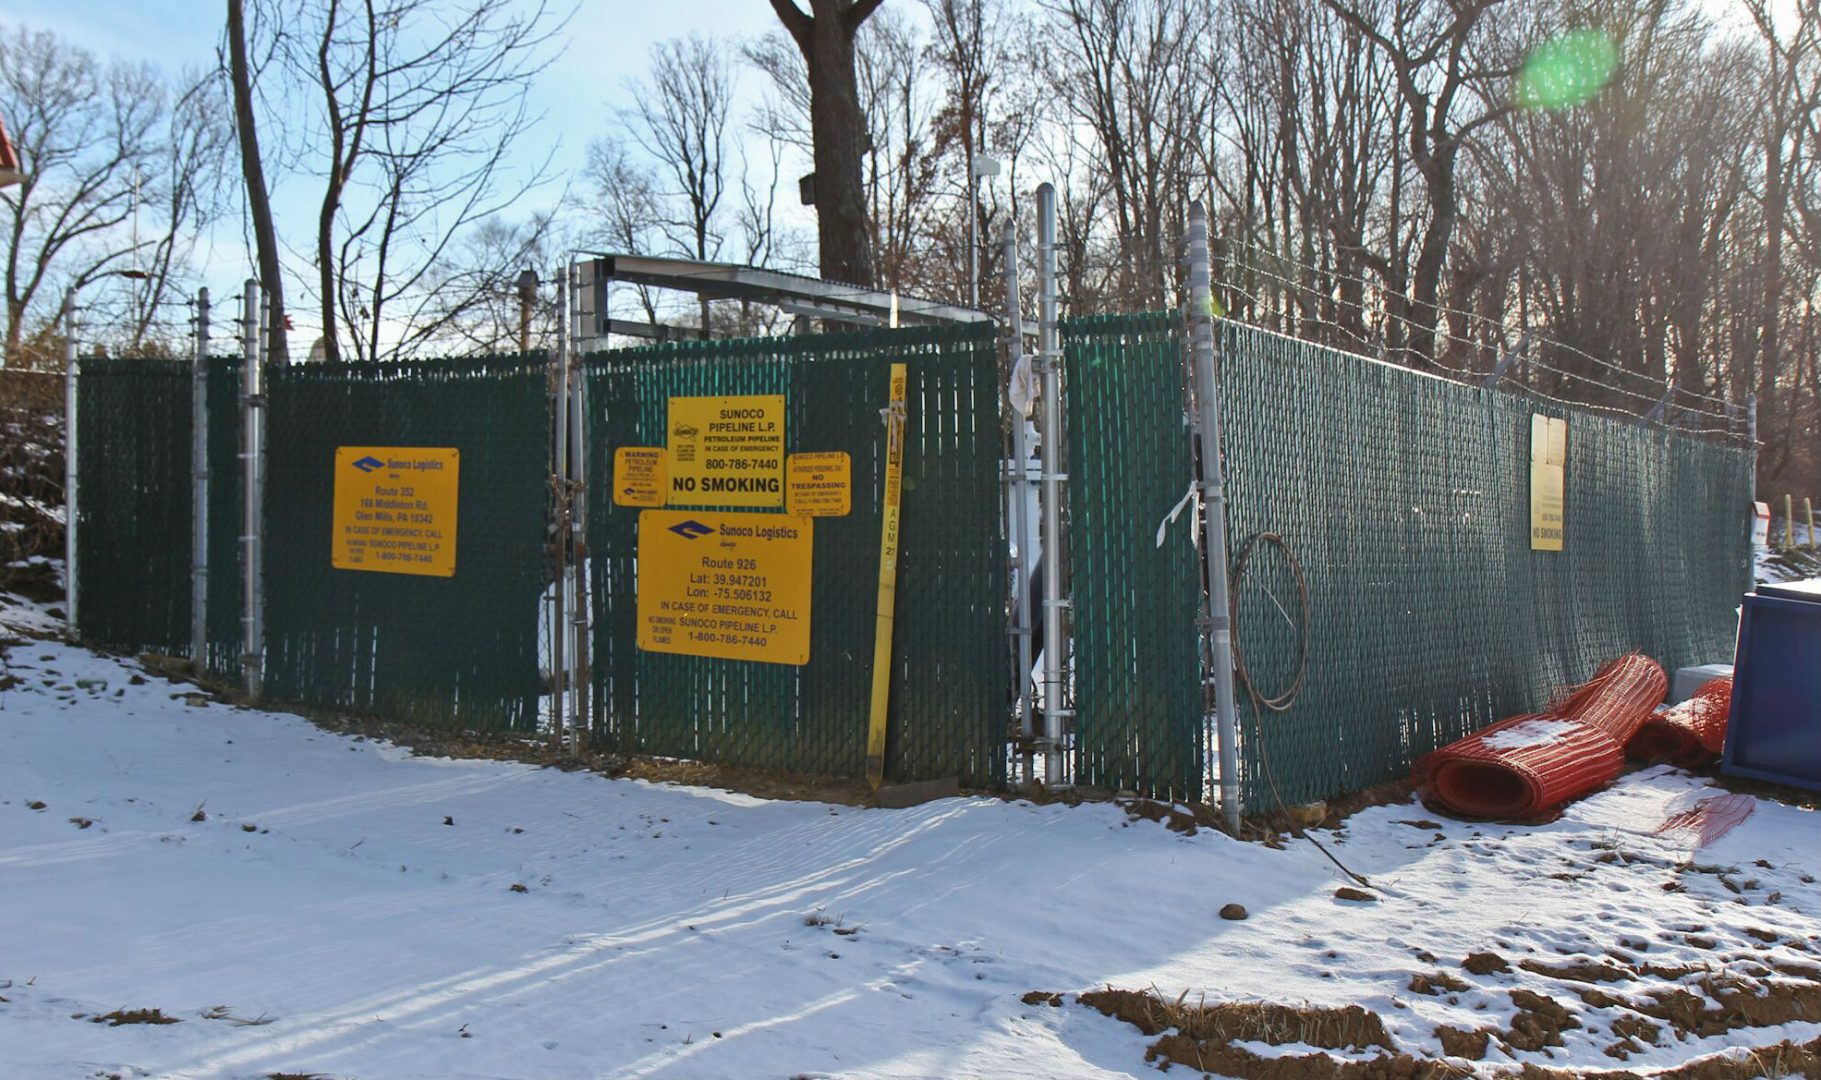 Sunoco's work on the Mariner East 2 pipeline has been suspended by the Pennsylvania environmental protection department. This photo, taken Wednesday, shows a work area off Fallbrook Lane in Glen Mills, near Philadelphia.